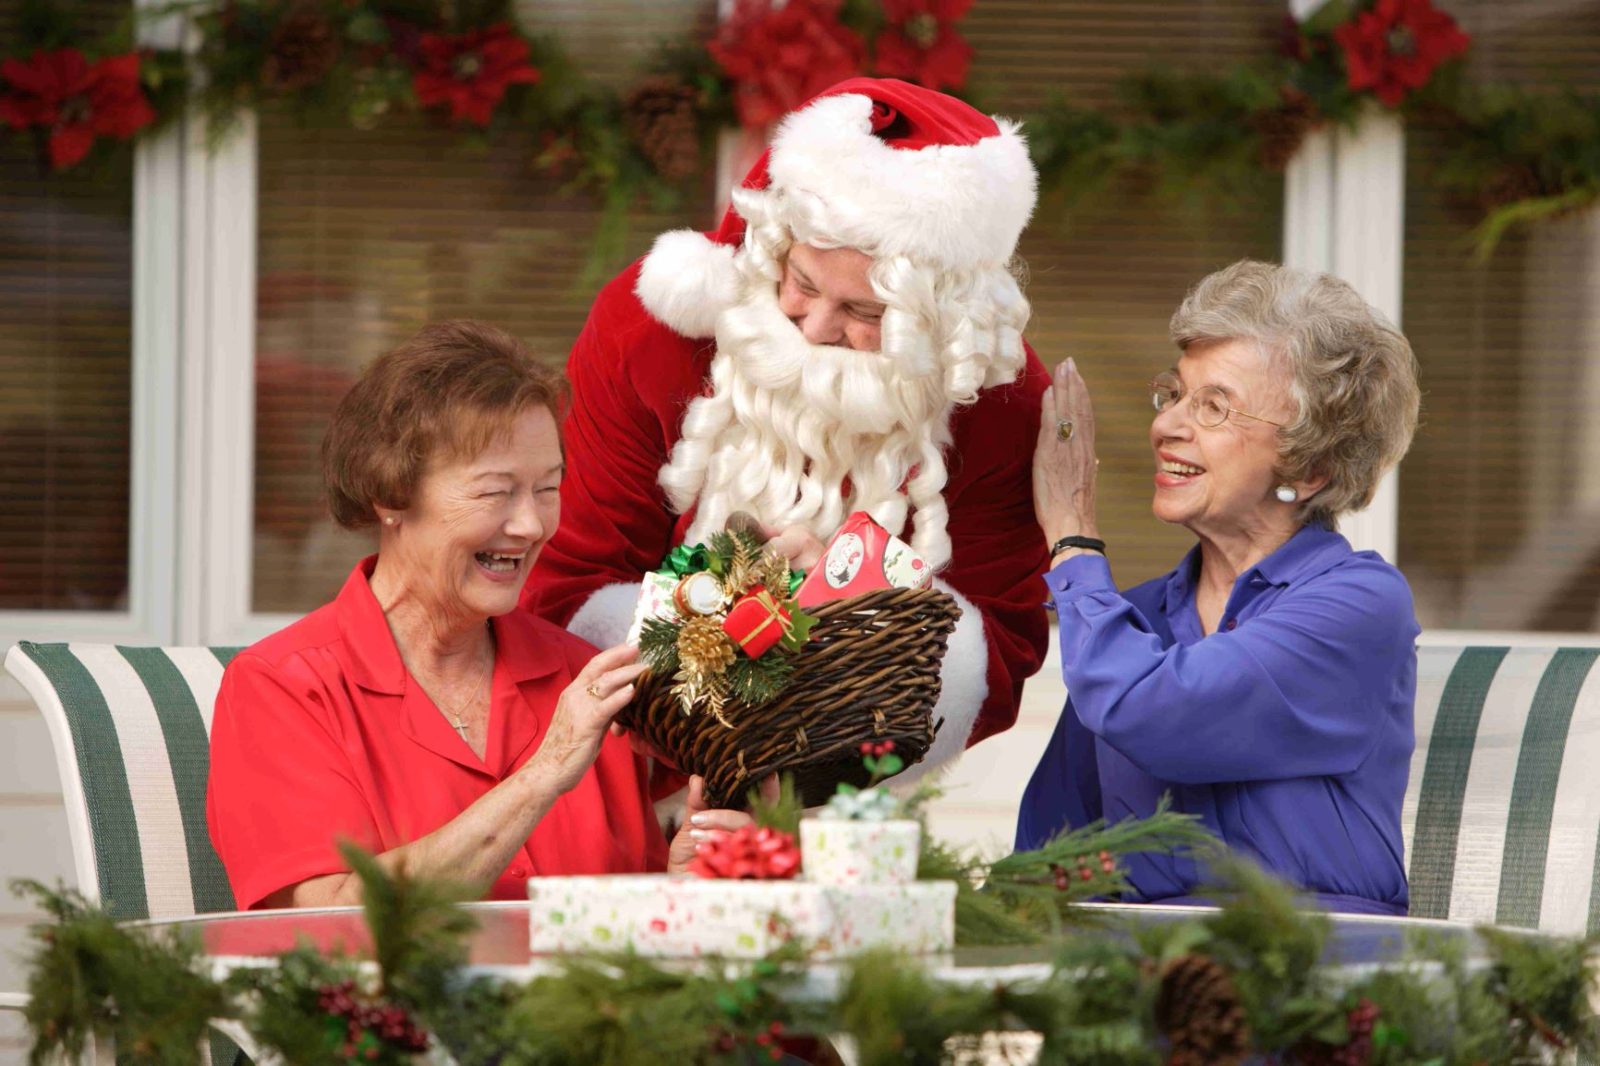 Local businesses join forces to bring the Christmas spirit to local seniors